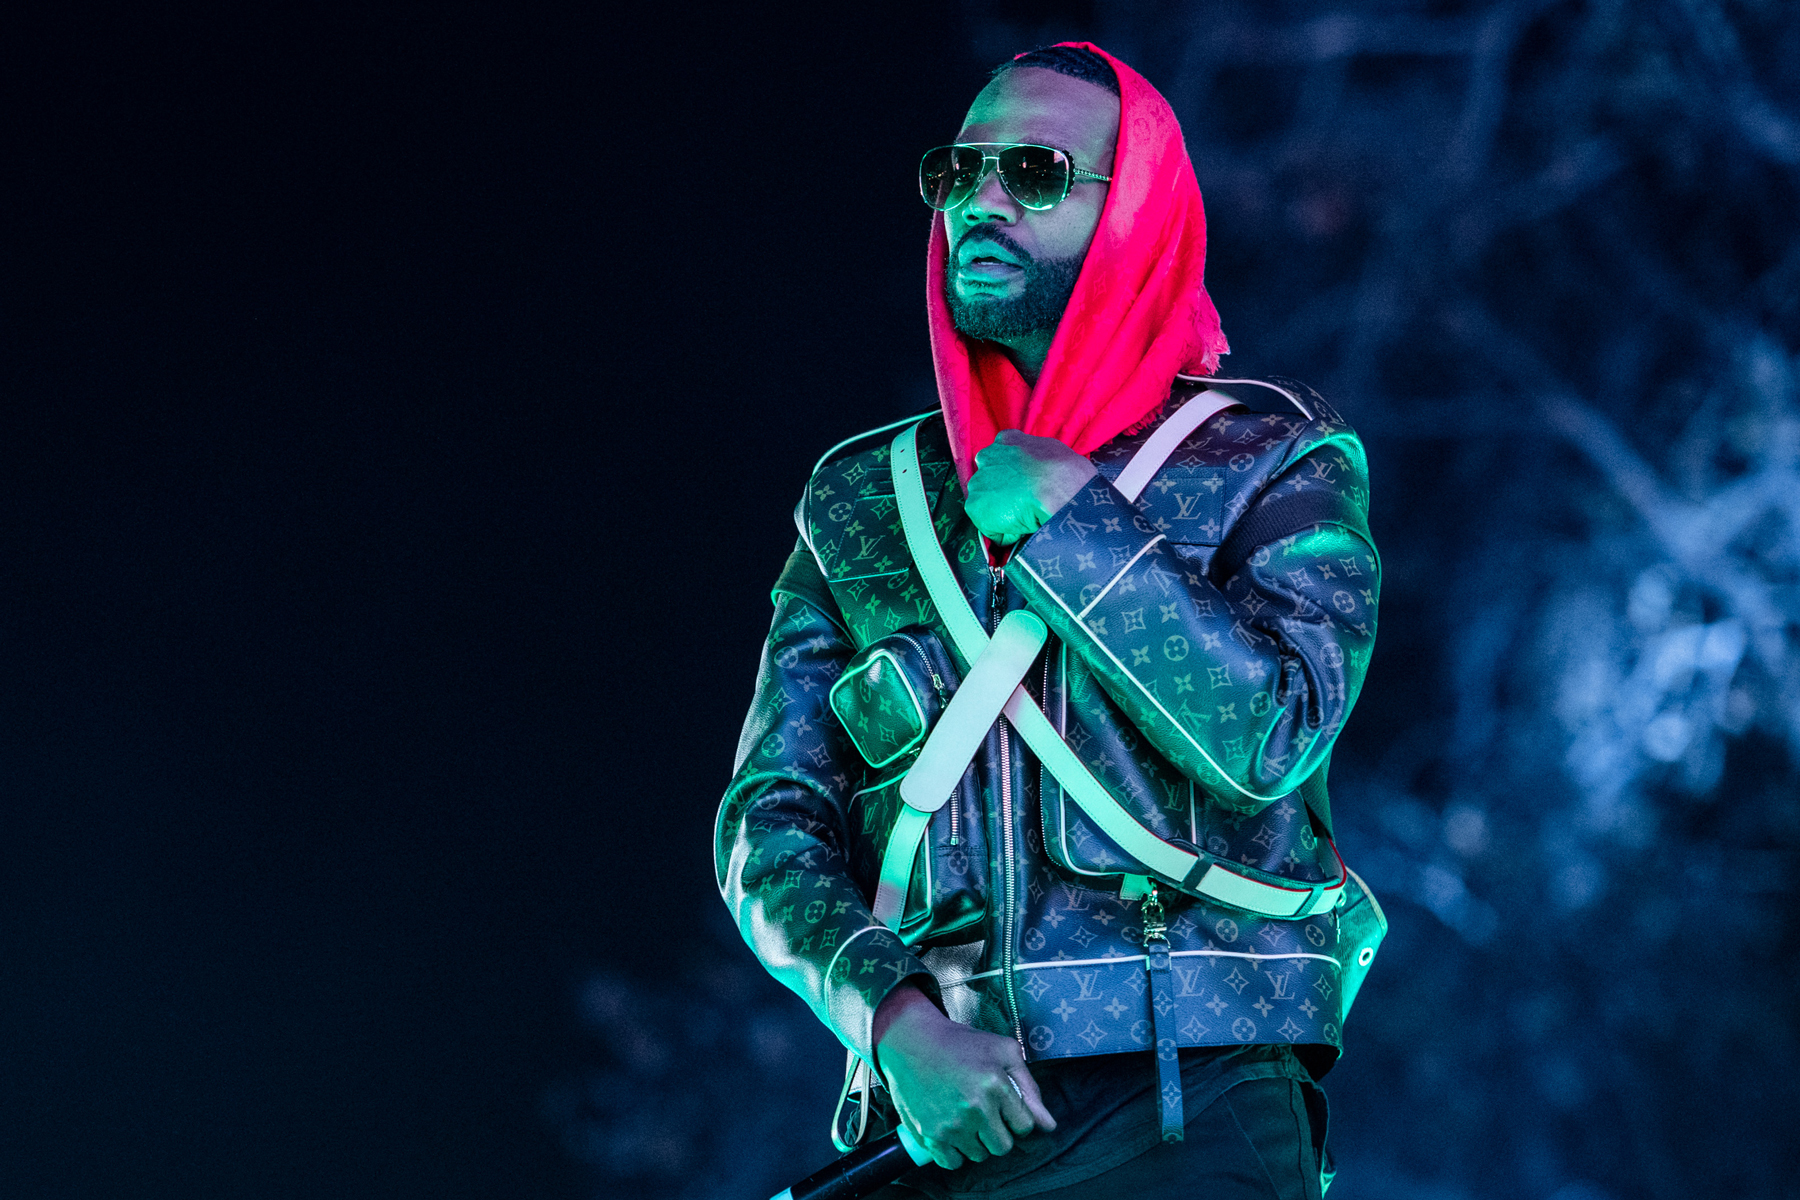 Juicy J Proclaims ‘Enough Is Enough’ on New Song ‘Hella F–kin’ Trauma’